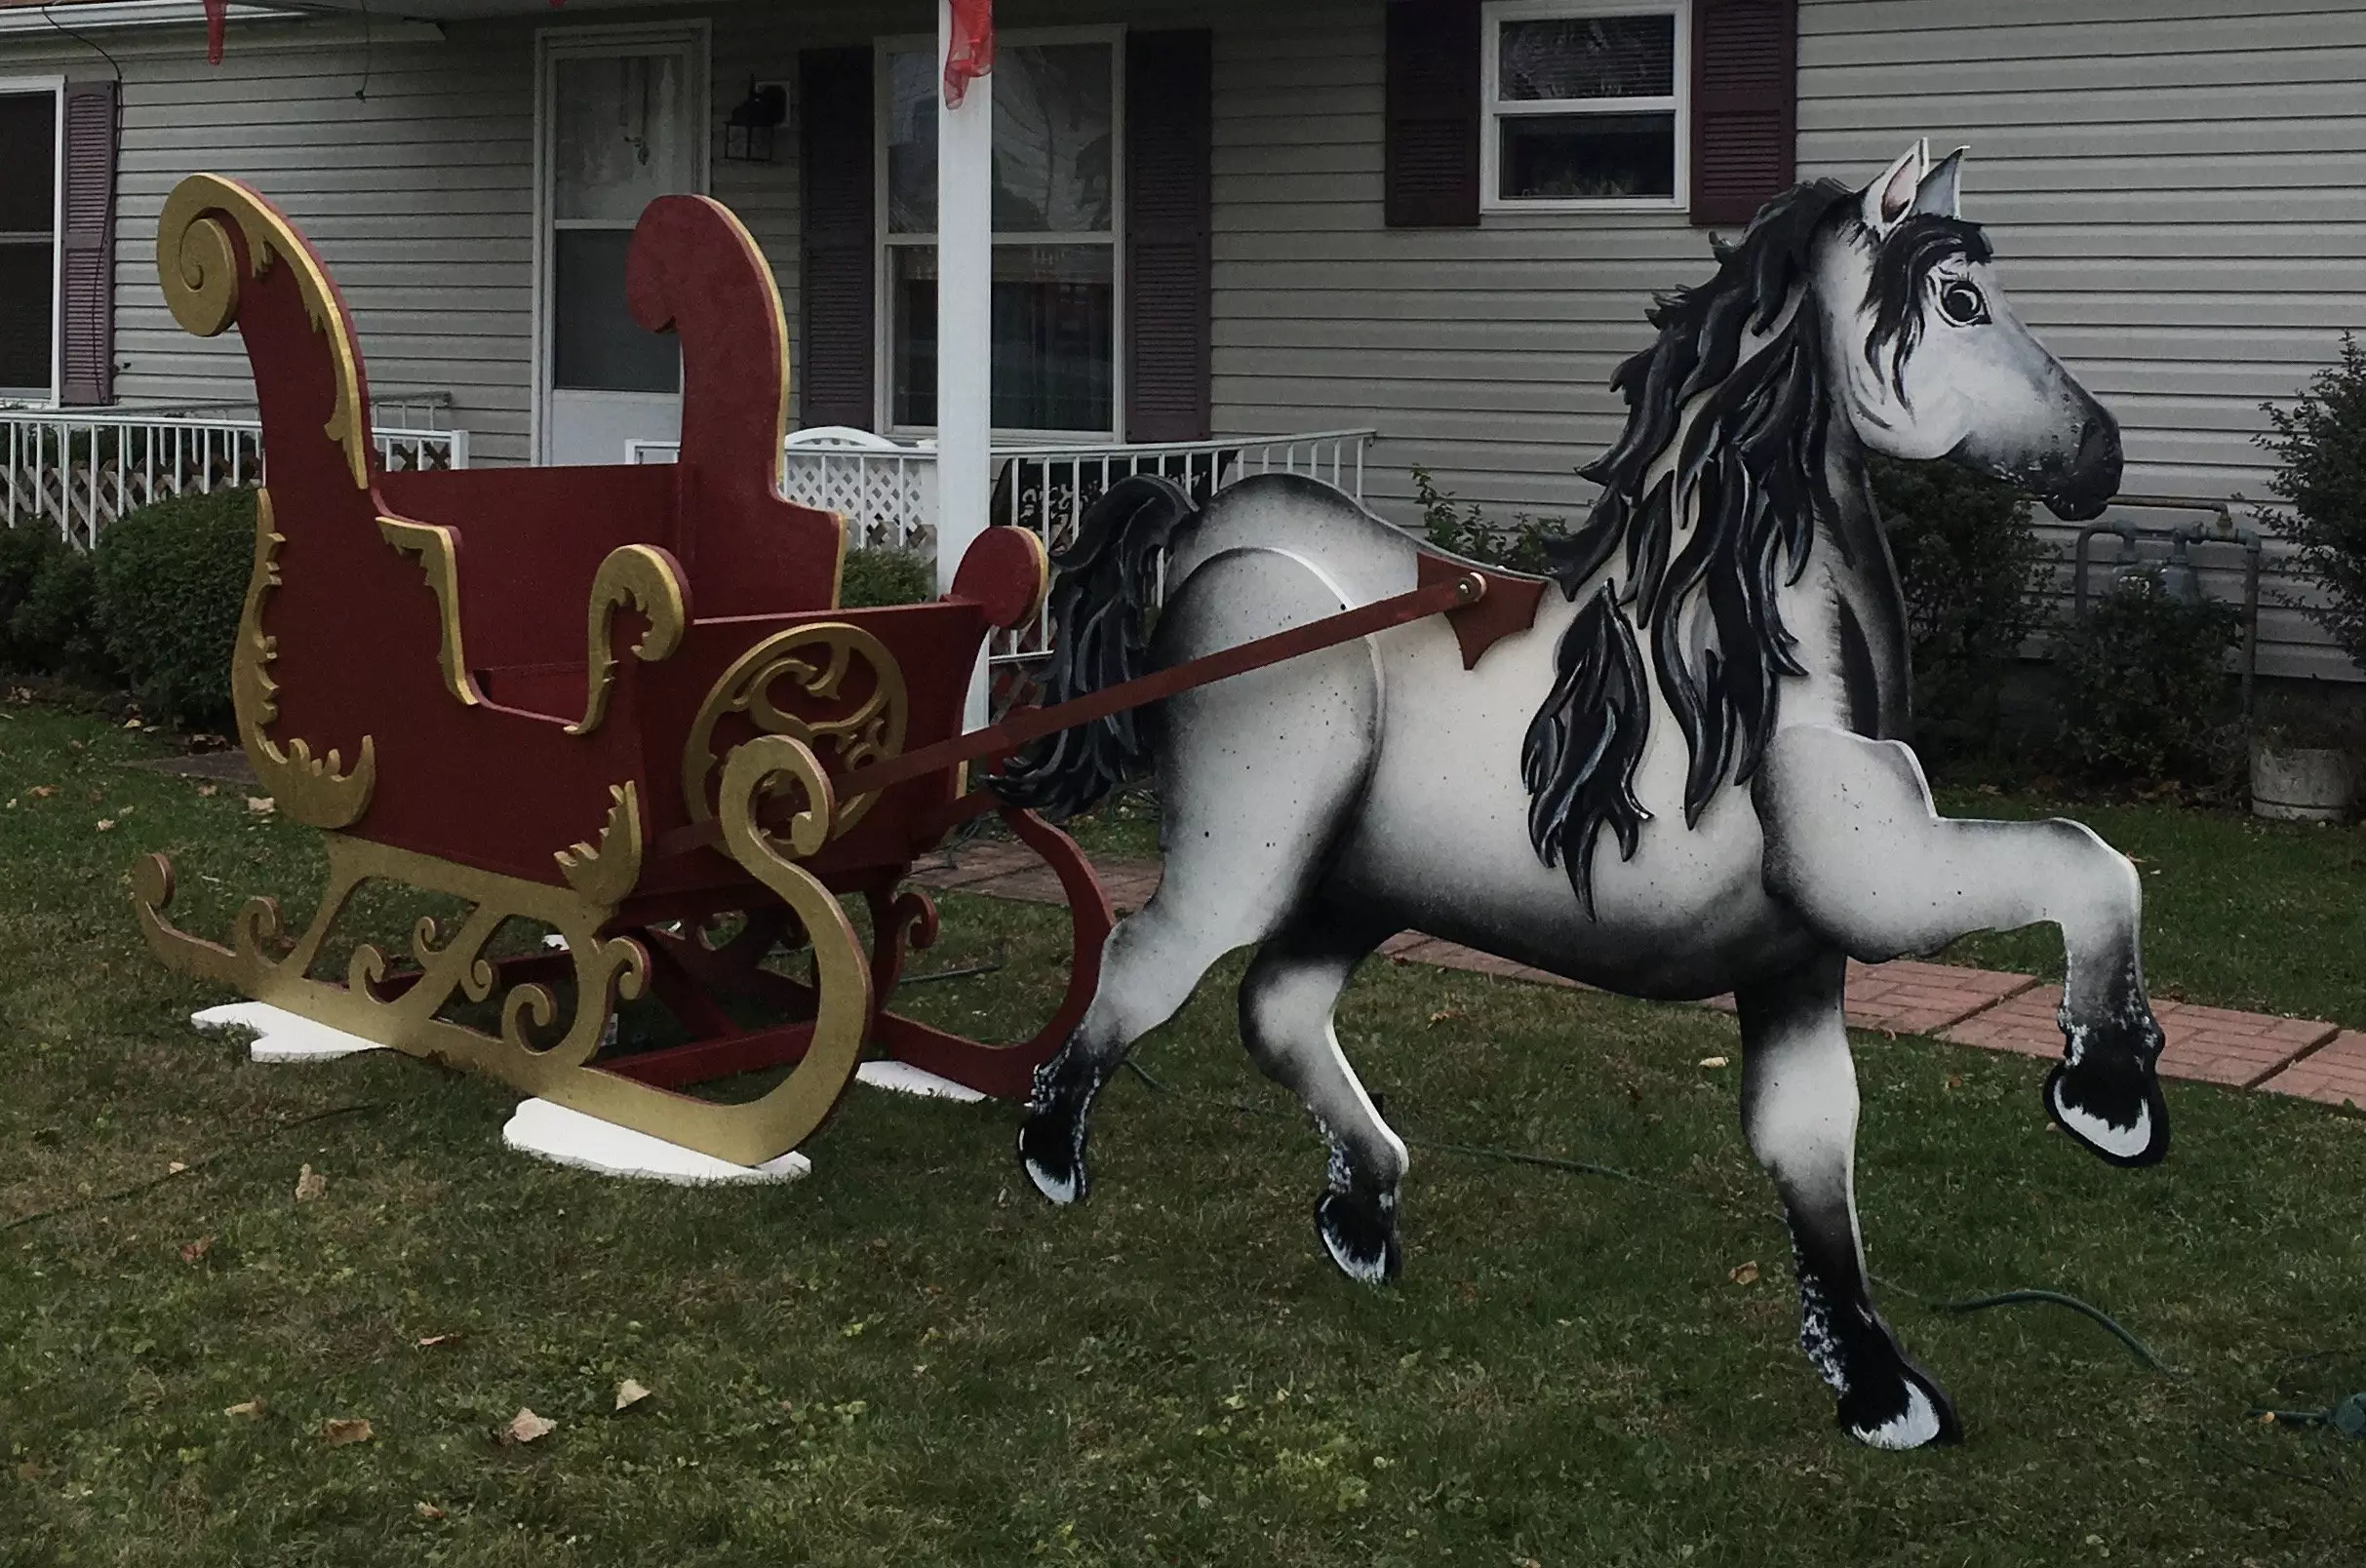 He unveiled the sleigh two weeks before his mother unexpectedly passed away (